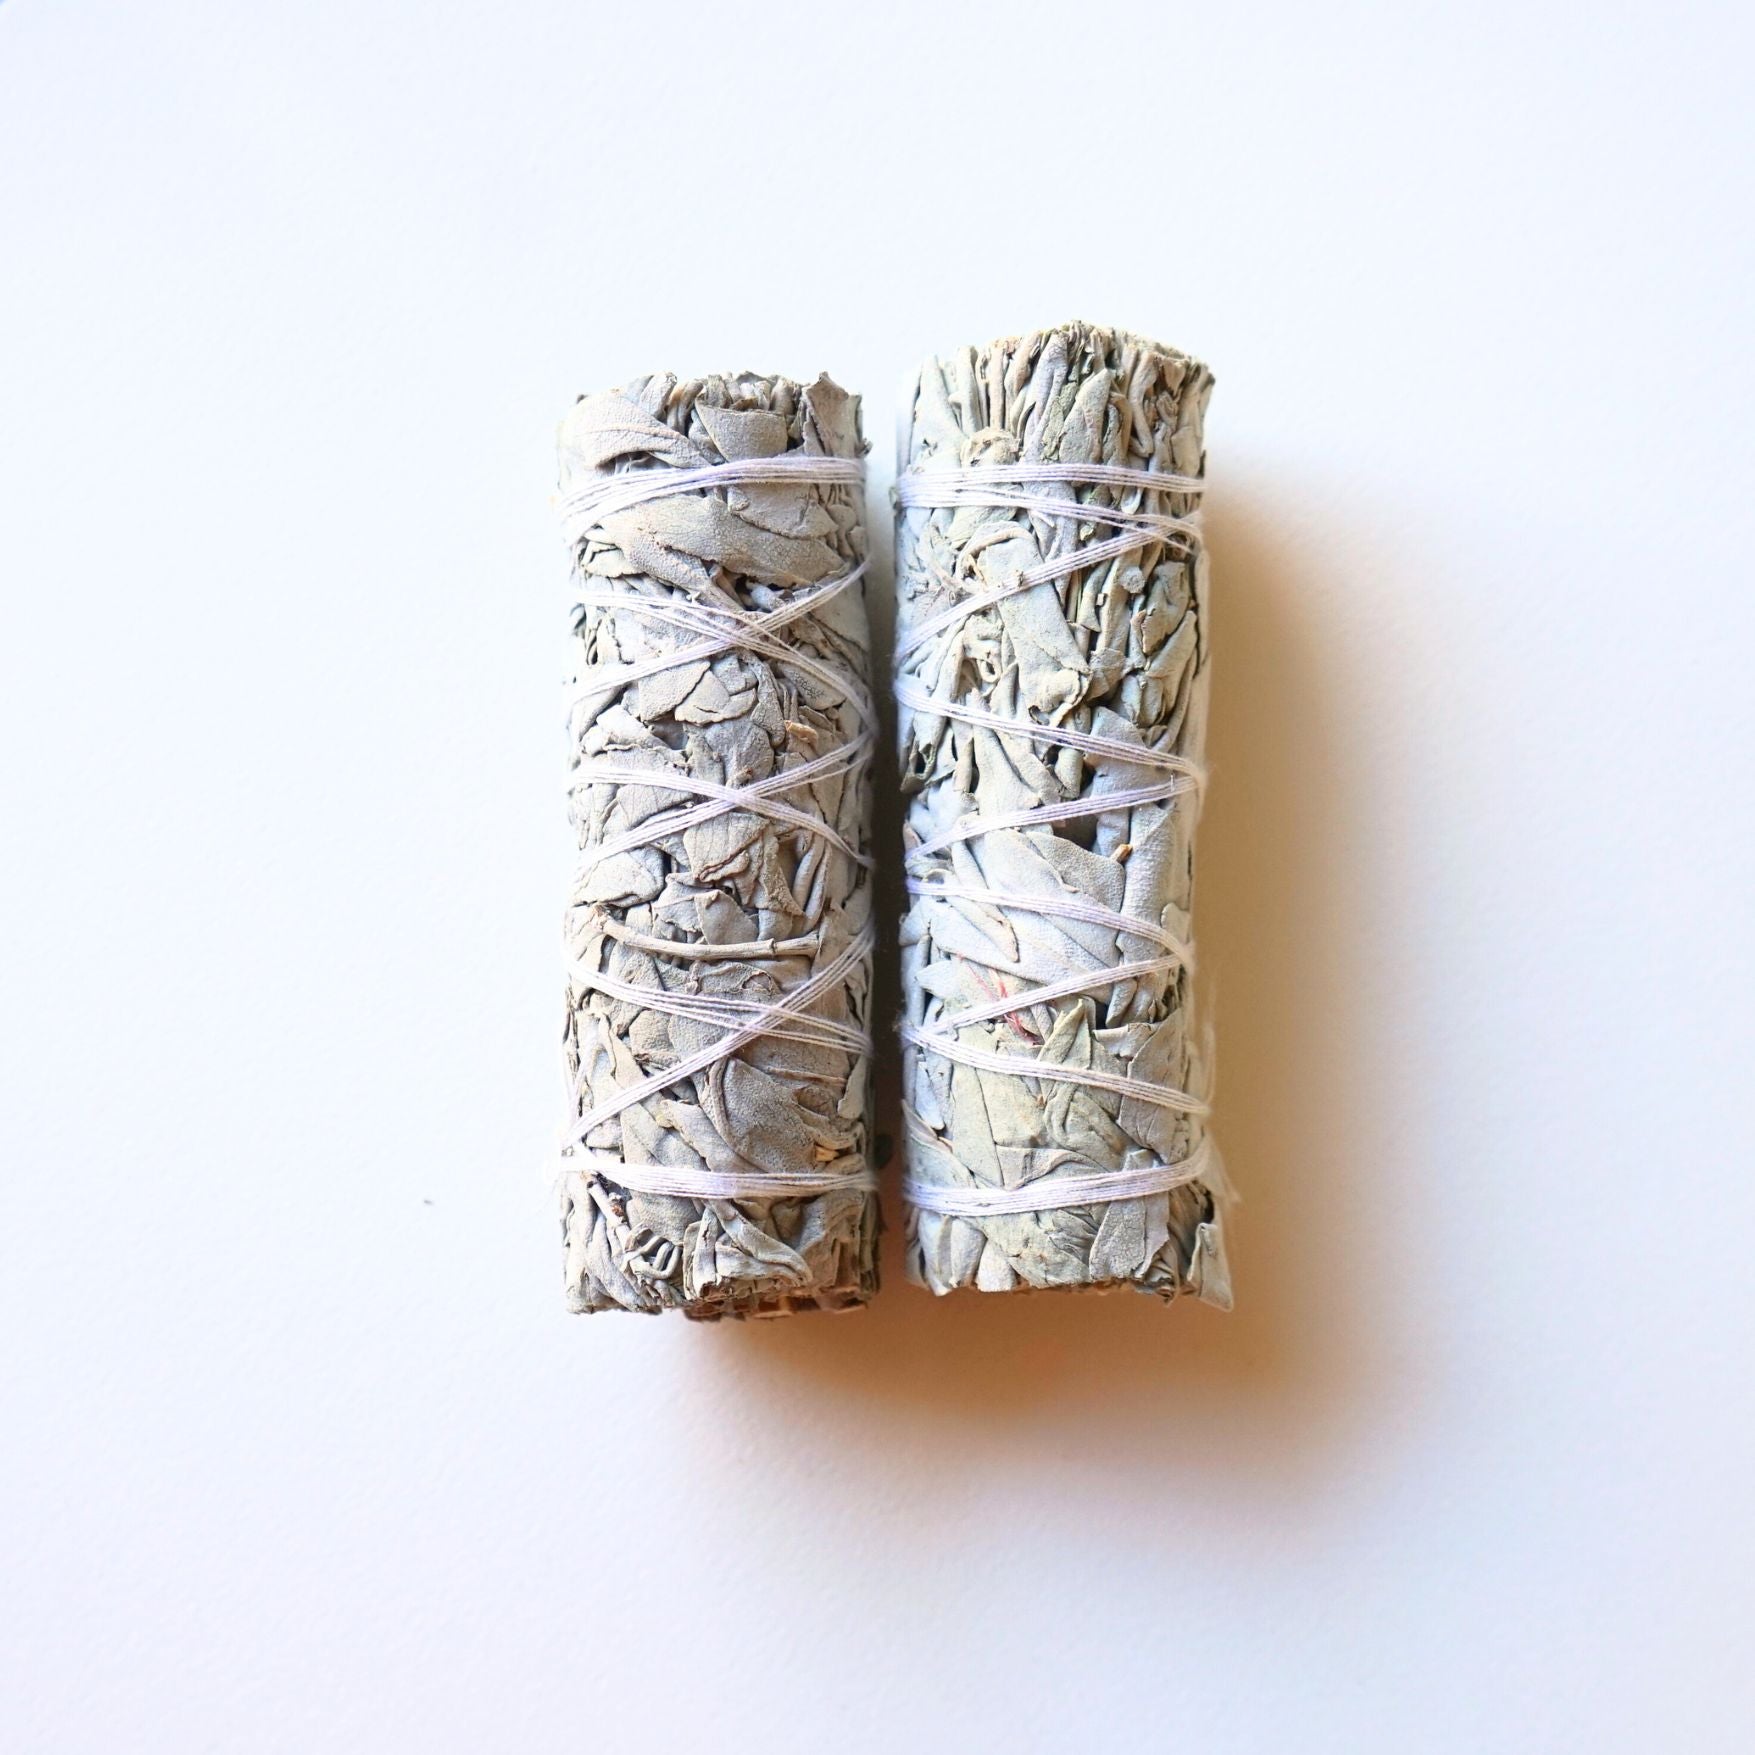 Purify and Energize with White Sage Smudge Sticks